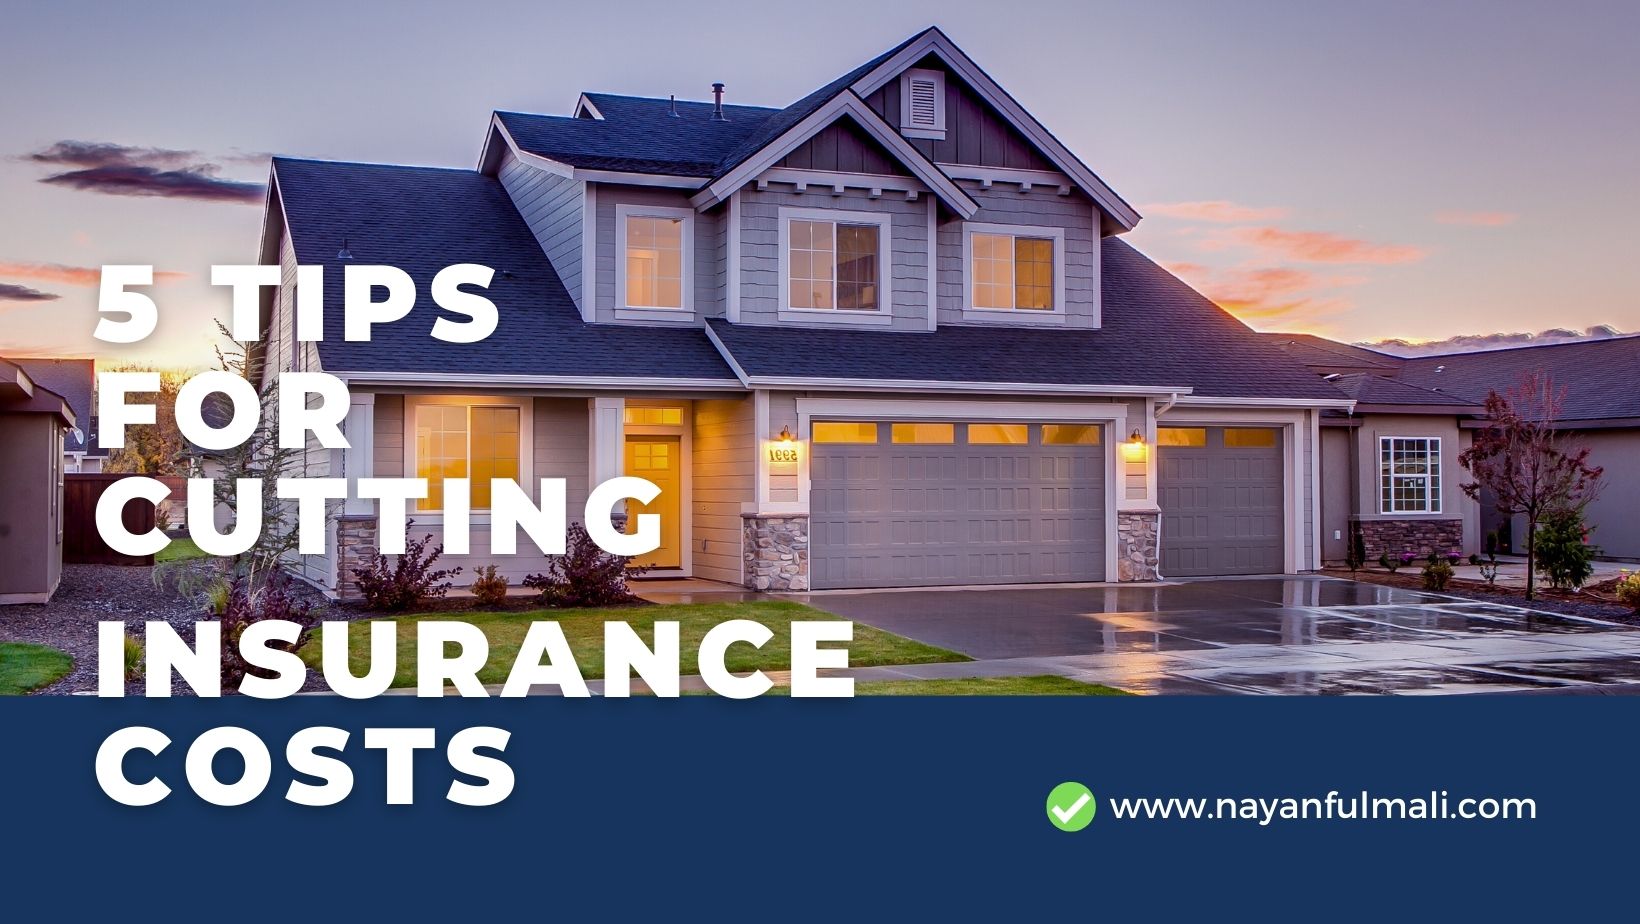 5 Tips for Cutting Home Insurance Costs in Atlanta